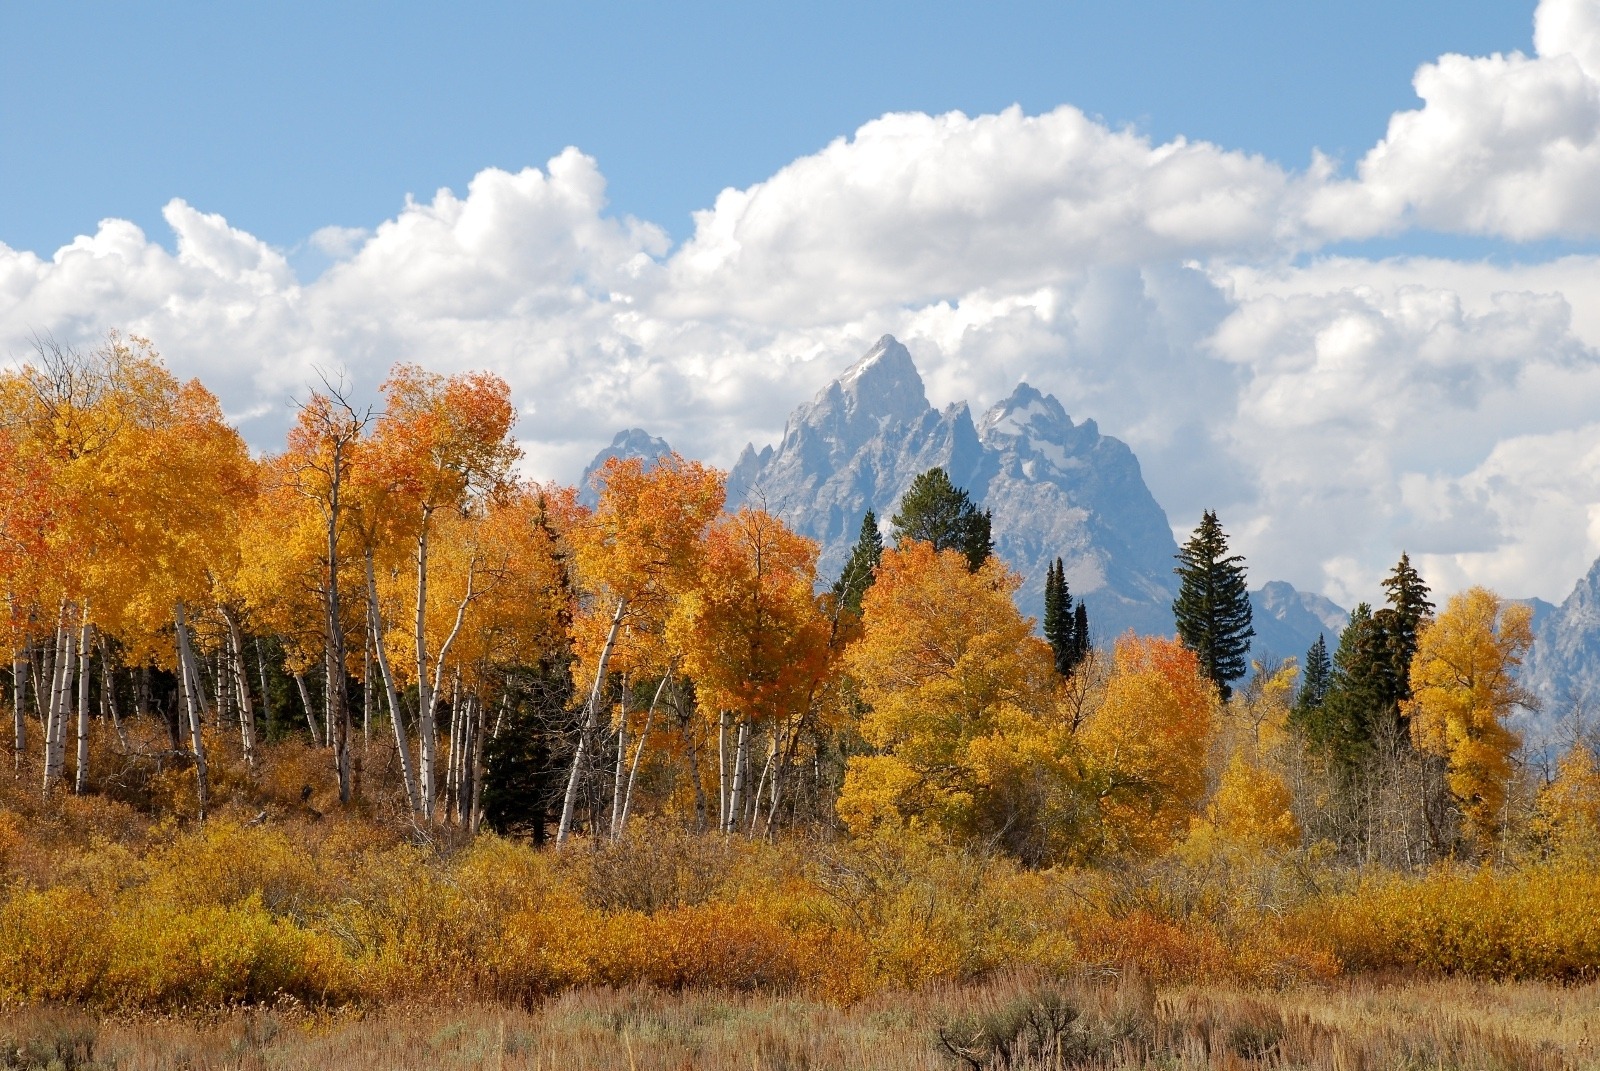 A priceless view belonging to the American public in Jackson Hole. Photo by Susan Marsh